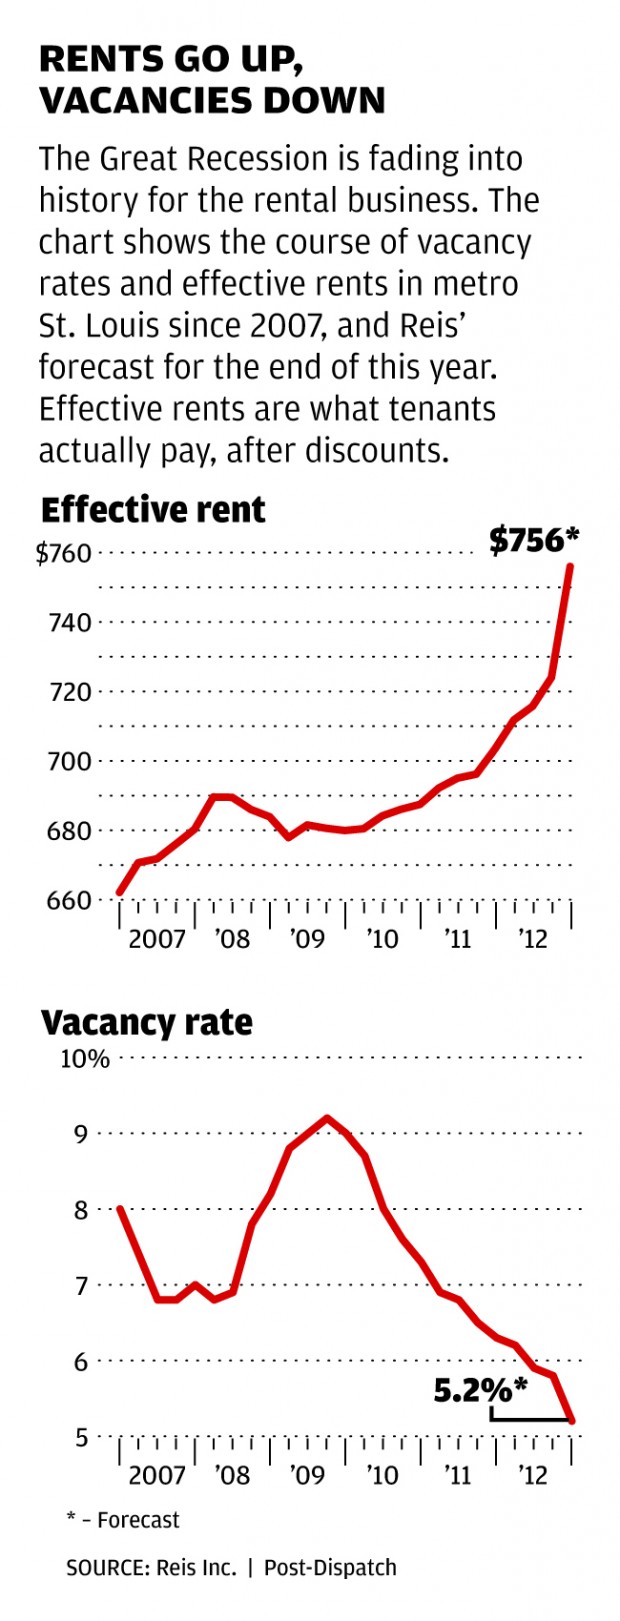 Apartment rents rise, vacancies fall in St. Louis : Business